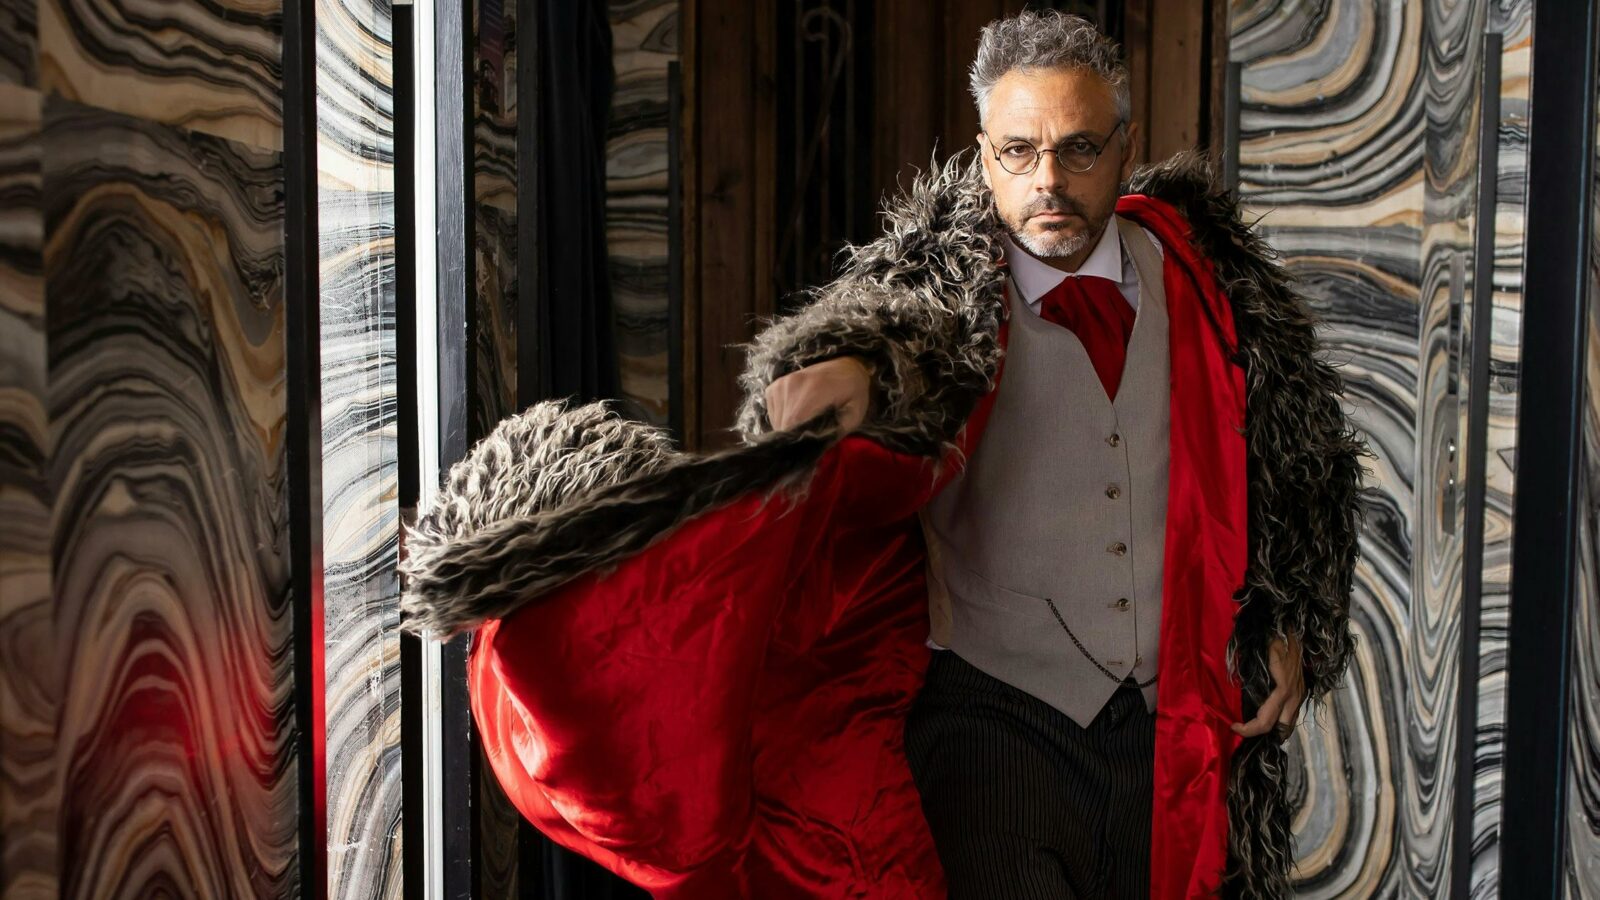 A well dressed man swooshes a fur coat with bright red inner lining.